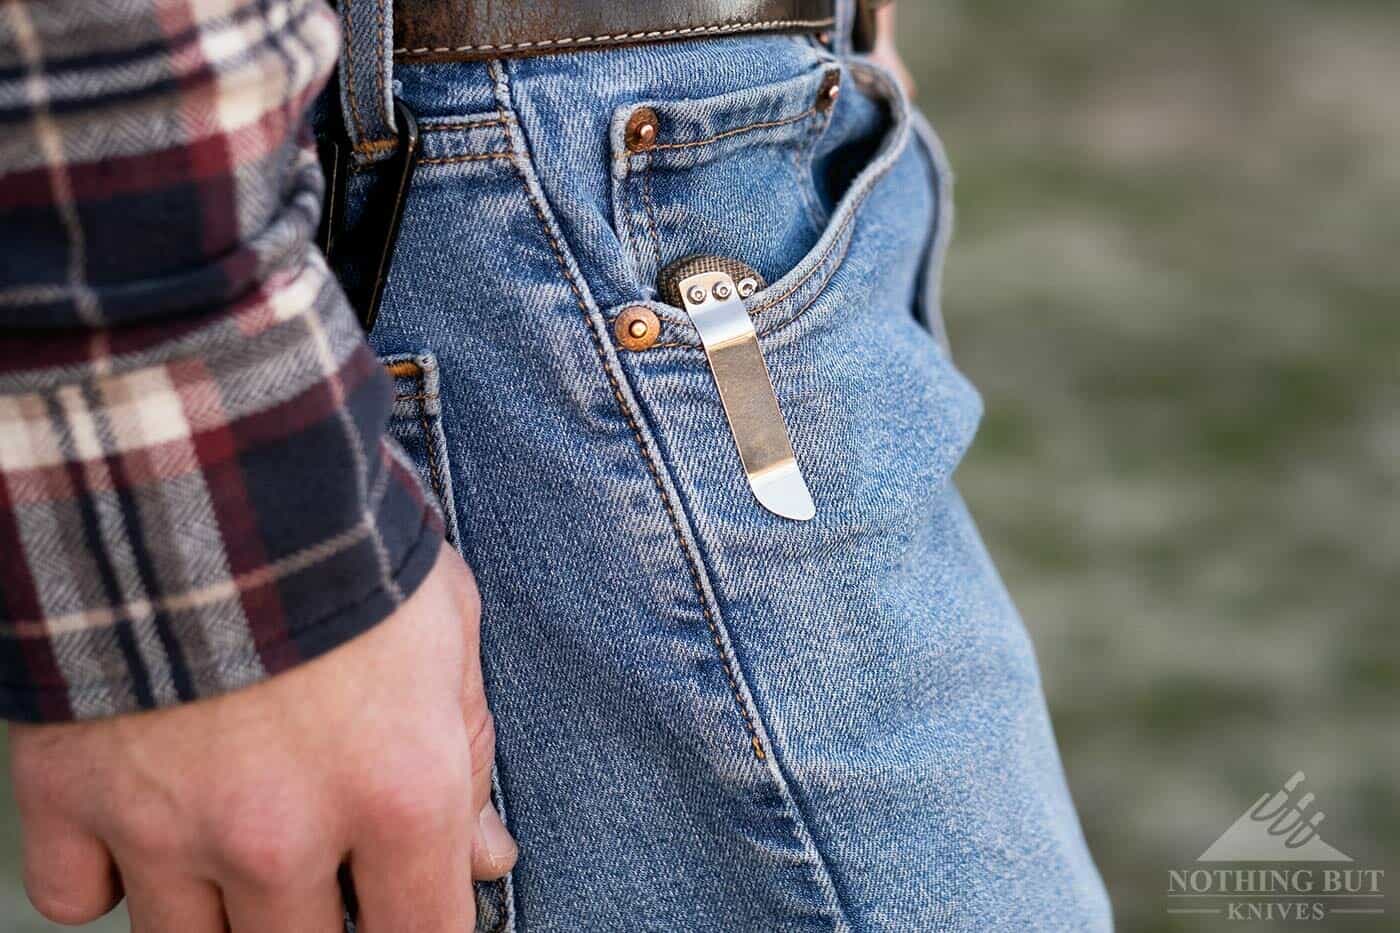 The Kizer Sheepdog in the pocket of a pair of jeans. 